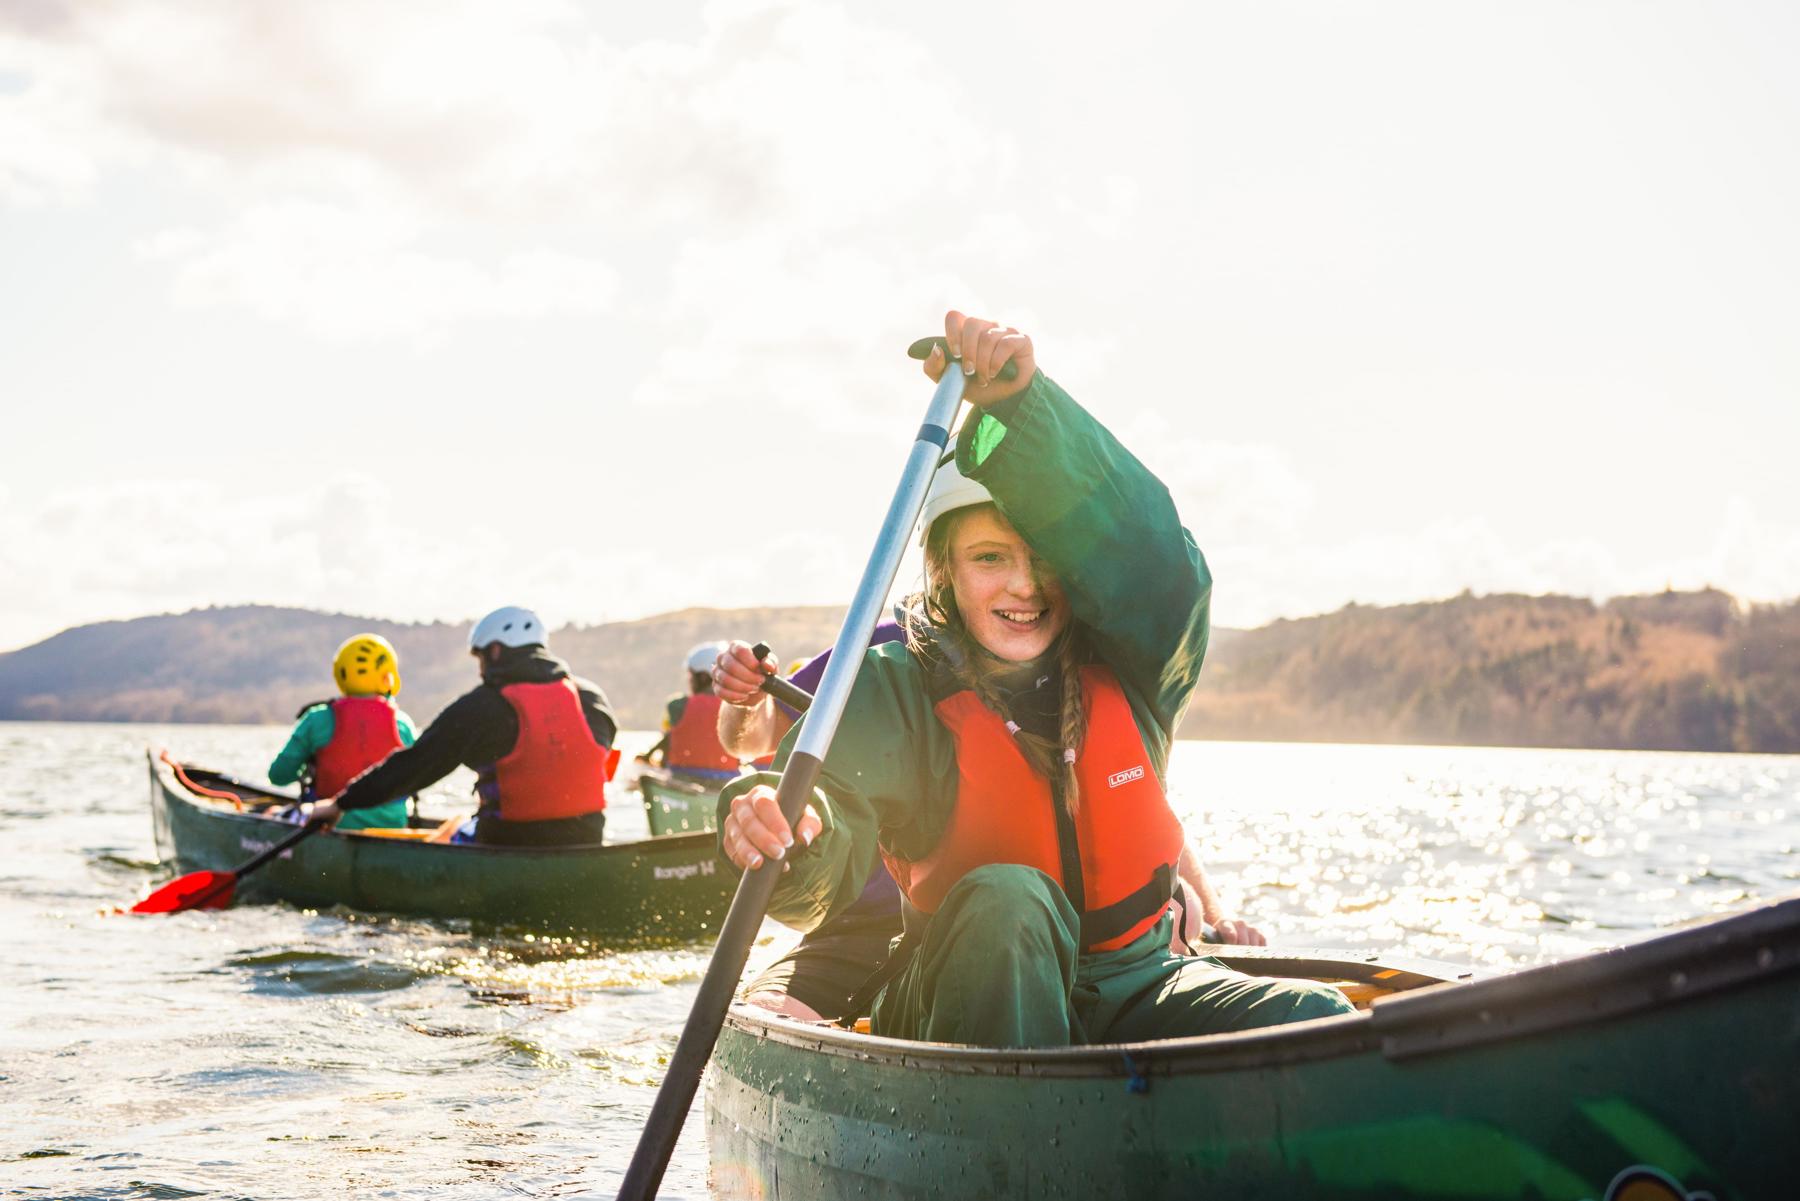 A group of Scouts are out on a lake in canoes. There are hills in the background and a cloudy sky. A young girl is in her canoe and facing the camera. She is smiling while pushing her oar into the water. She's wearing a life jacket and helmet and looks like she's having a lot of fun.